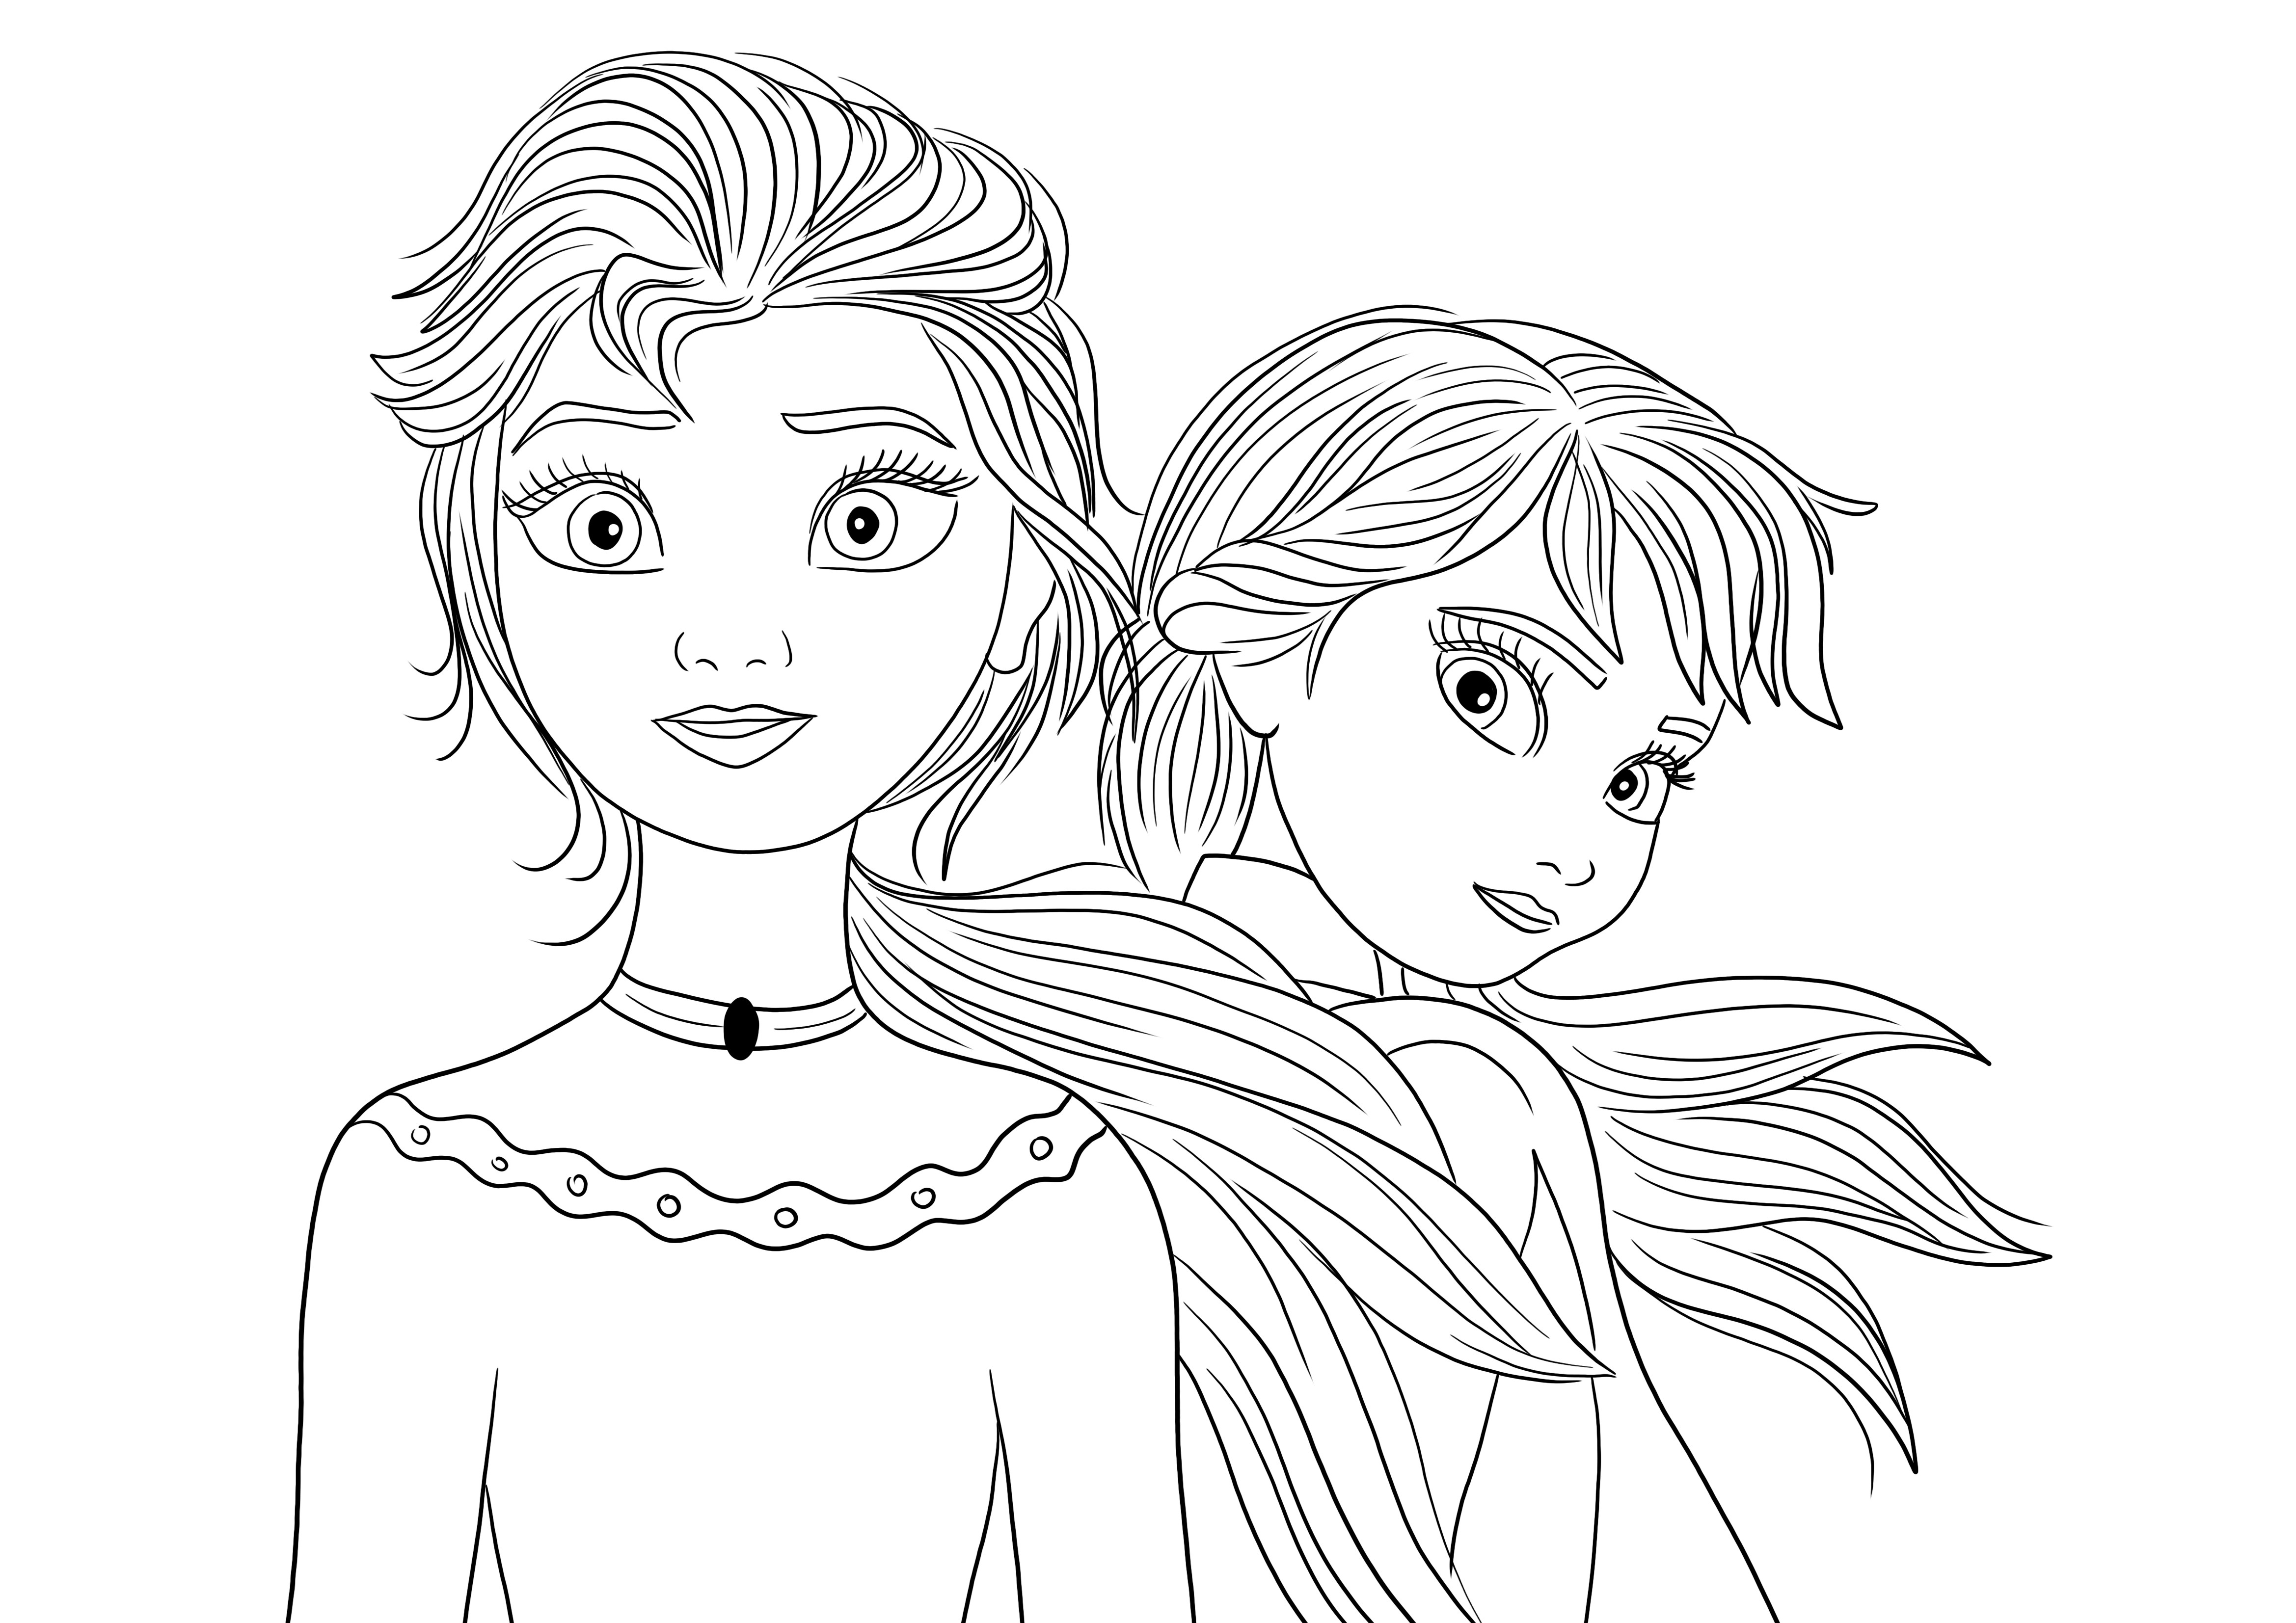 Elsa and Ana coloring image for all Frozen fans free to download